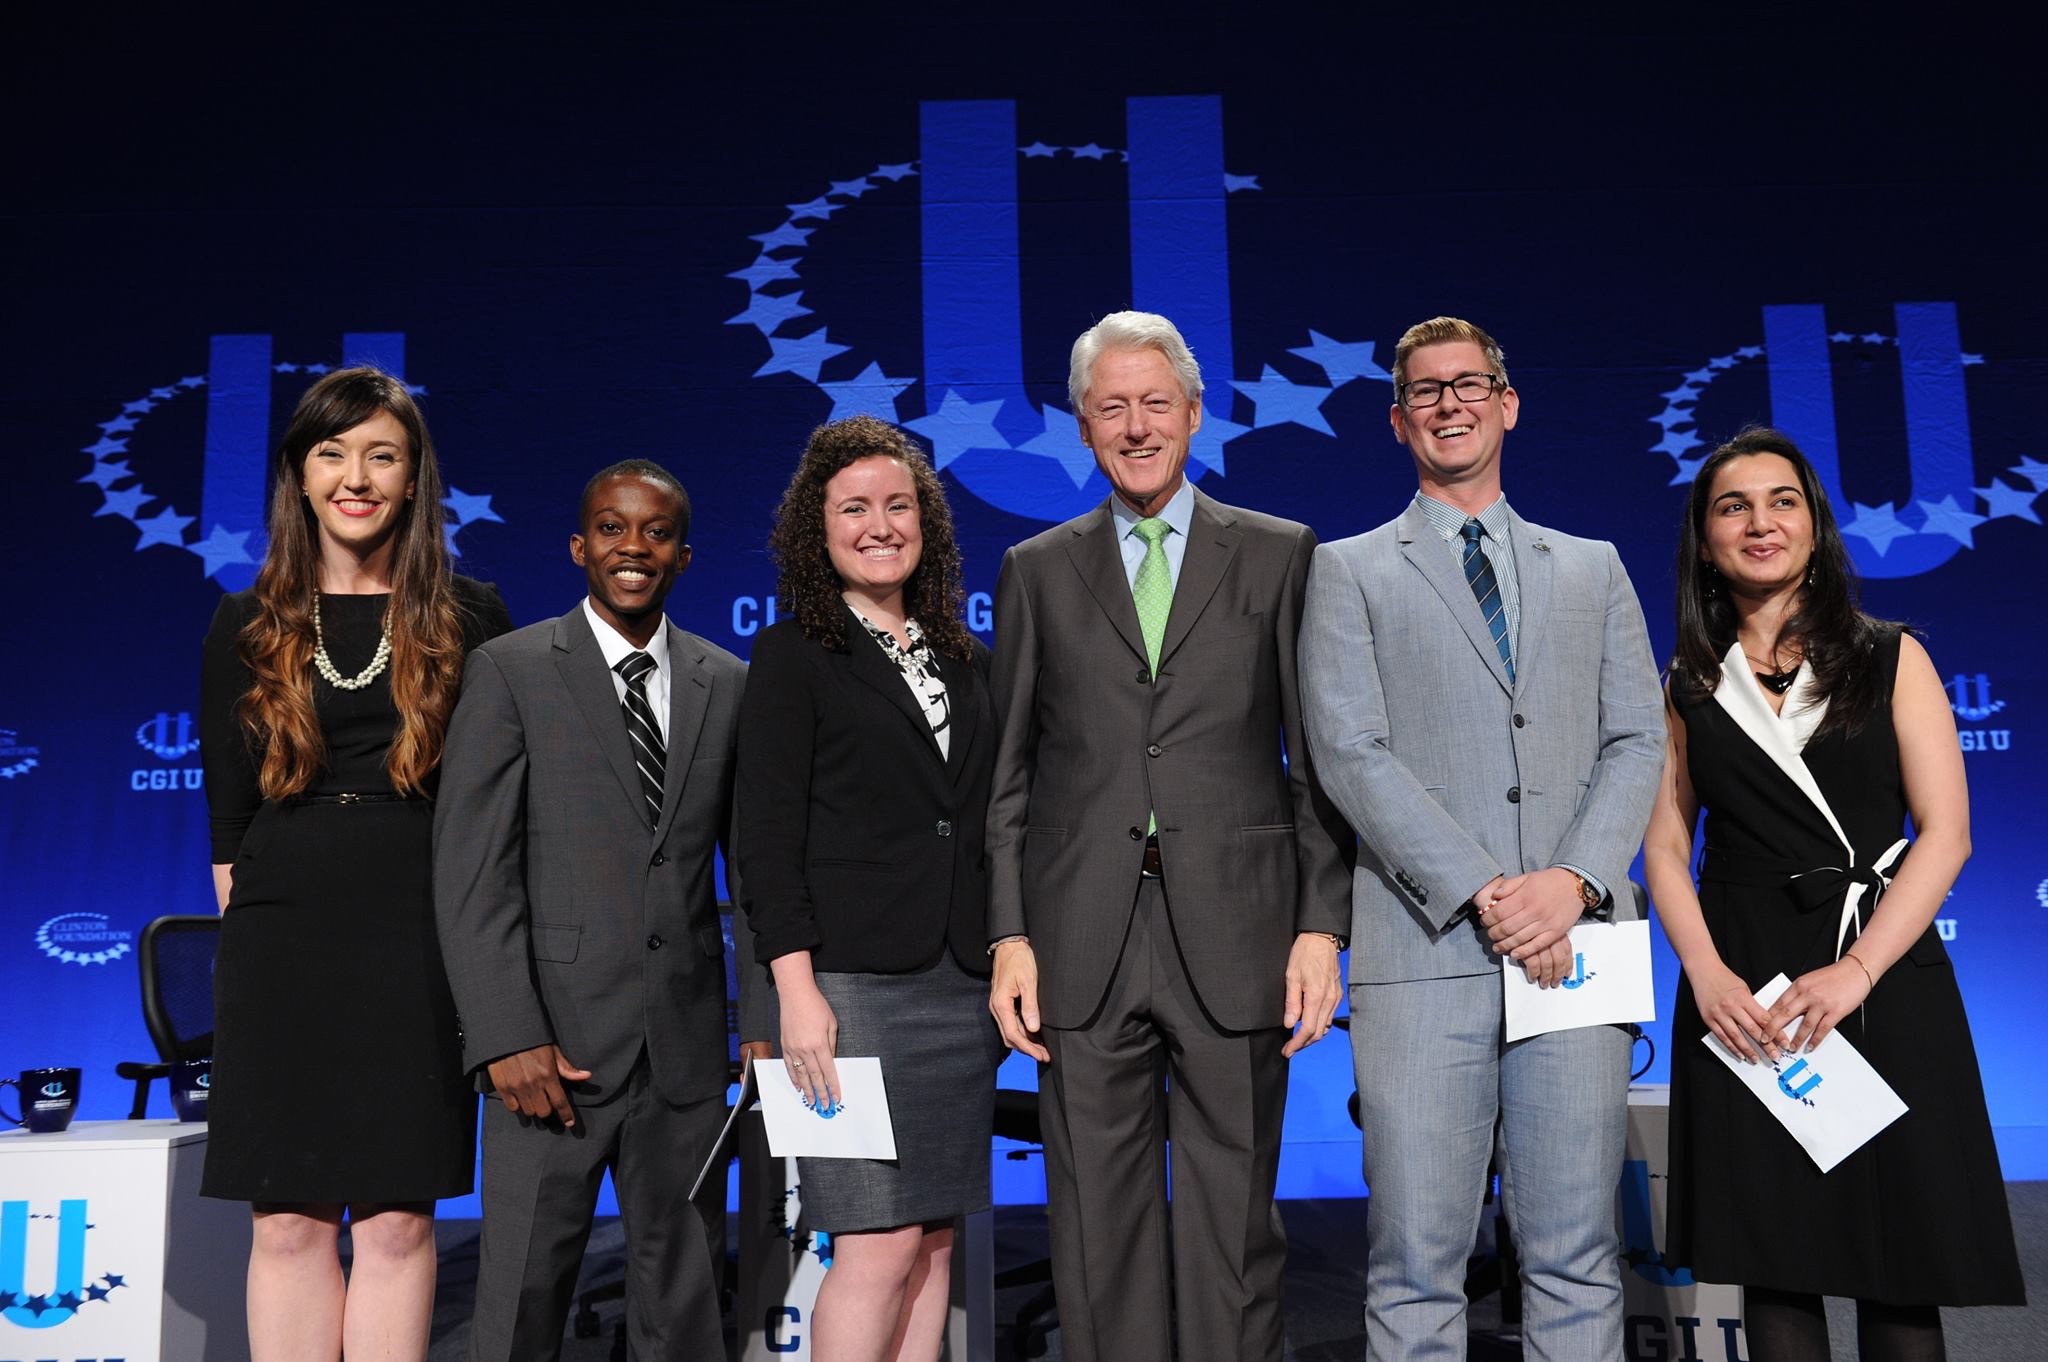 Mariam with President Clinton at the 8th annual CGI ​​​​​​U meeting from March 6-8, 2015 at the University of Miami, Coral Gables, Florida